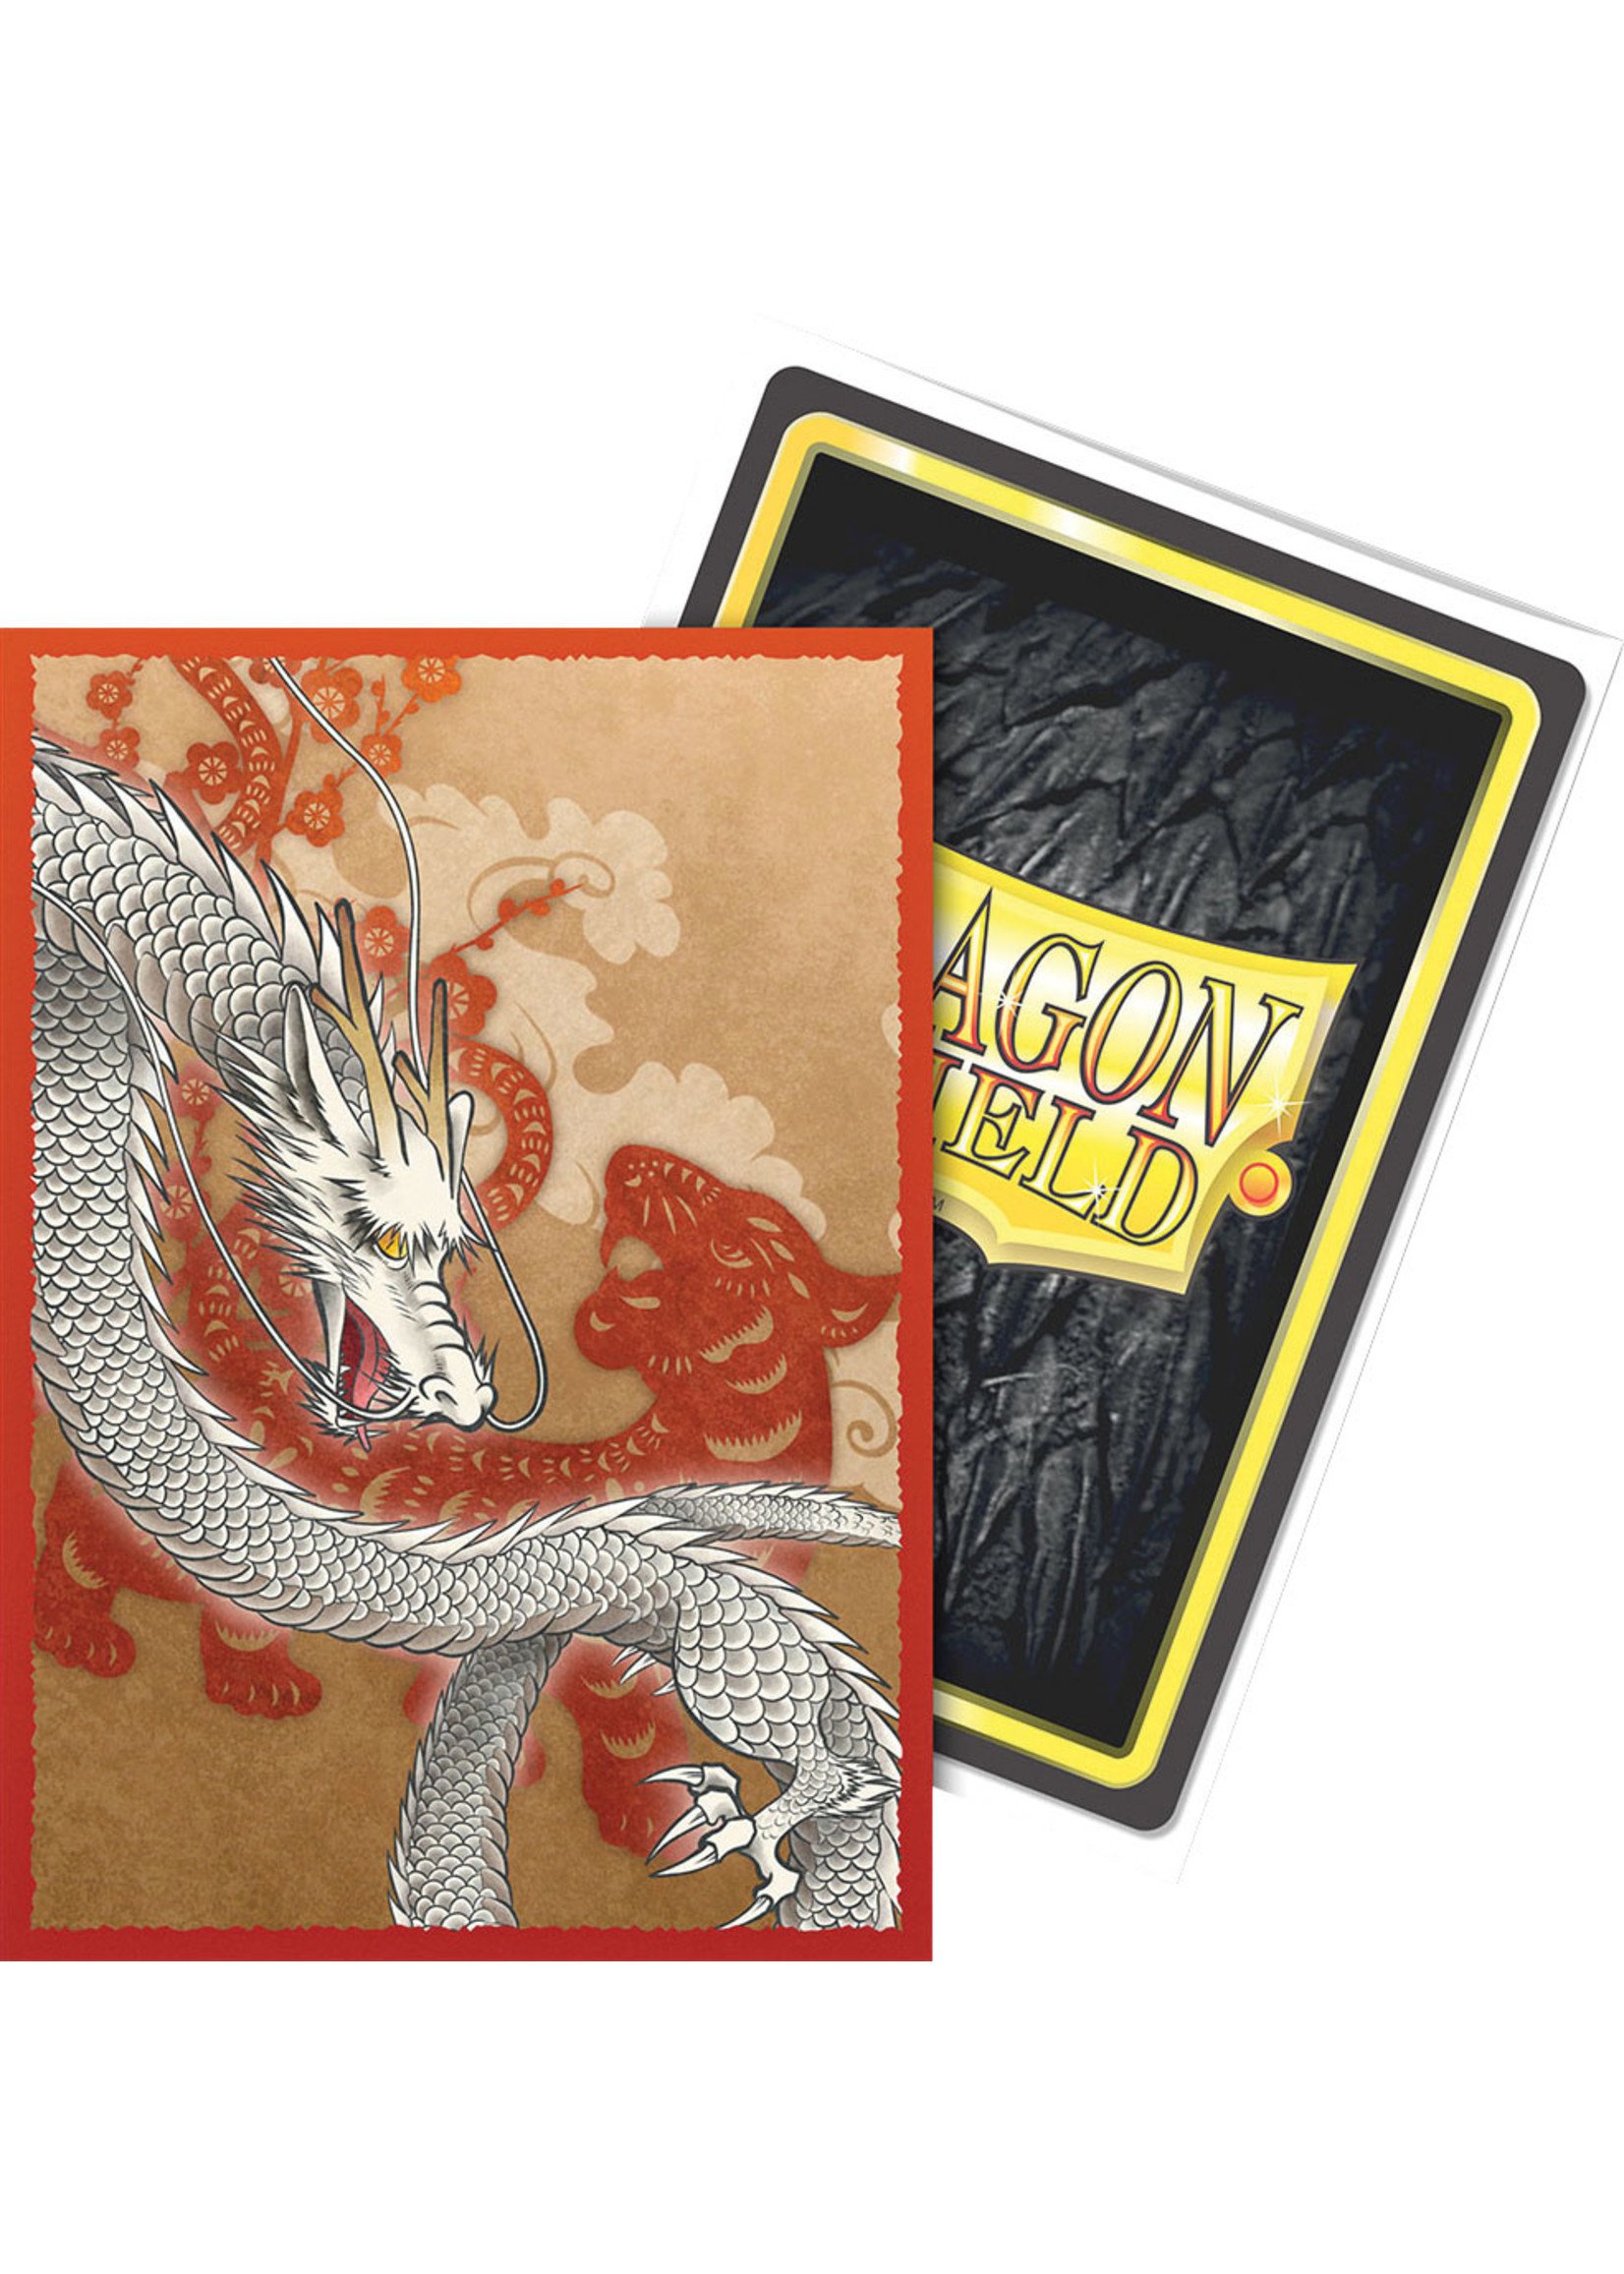 Dragon Shield Japanese-Size Sleeves - Gamescape North